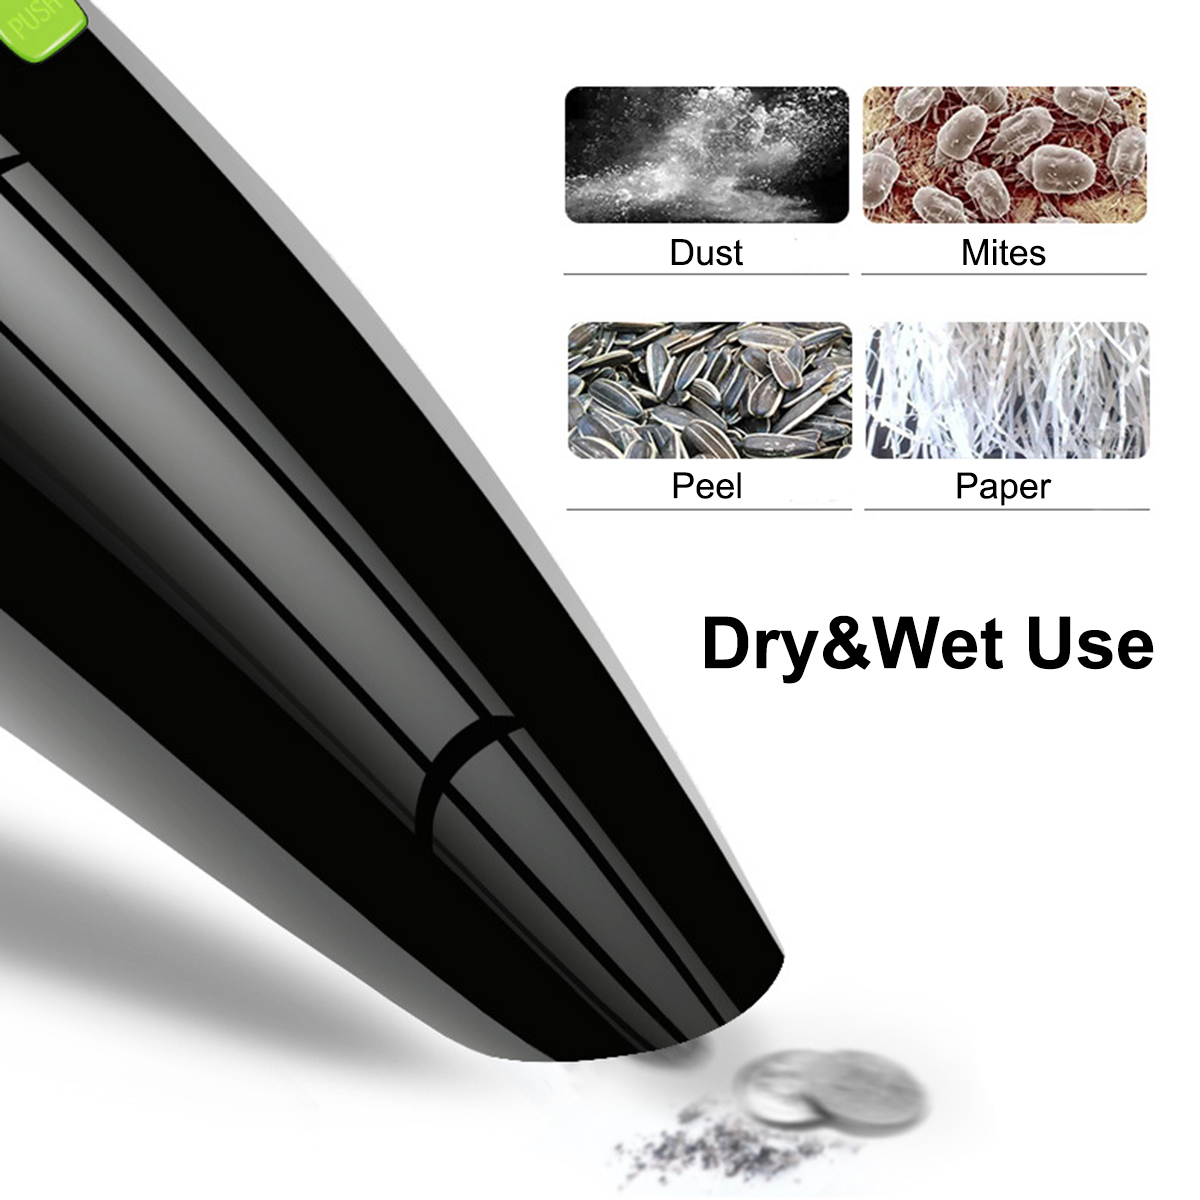 Handheld Wireless Vacuum Cleaner Home 120W USB Cordless Wet Dry Mini Vacuum Cleaner Dust Collector For Home Car Cleaning